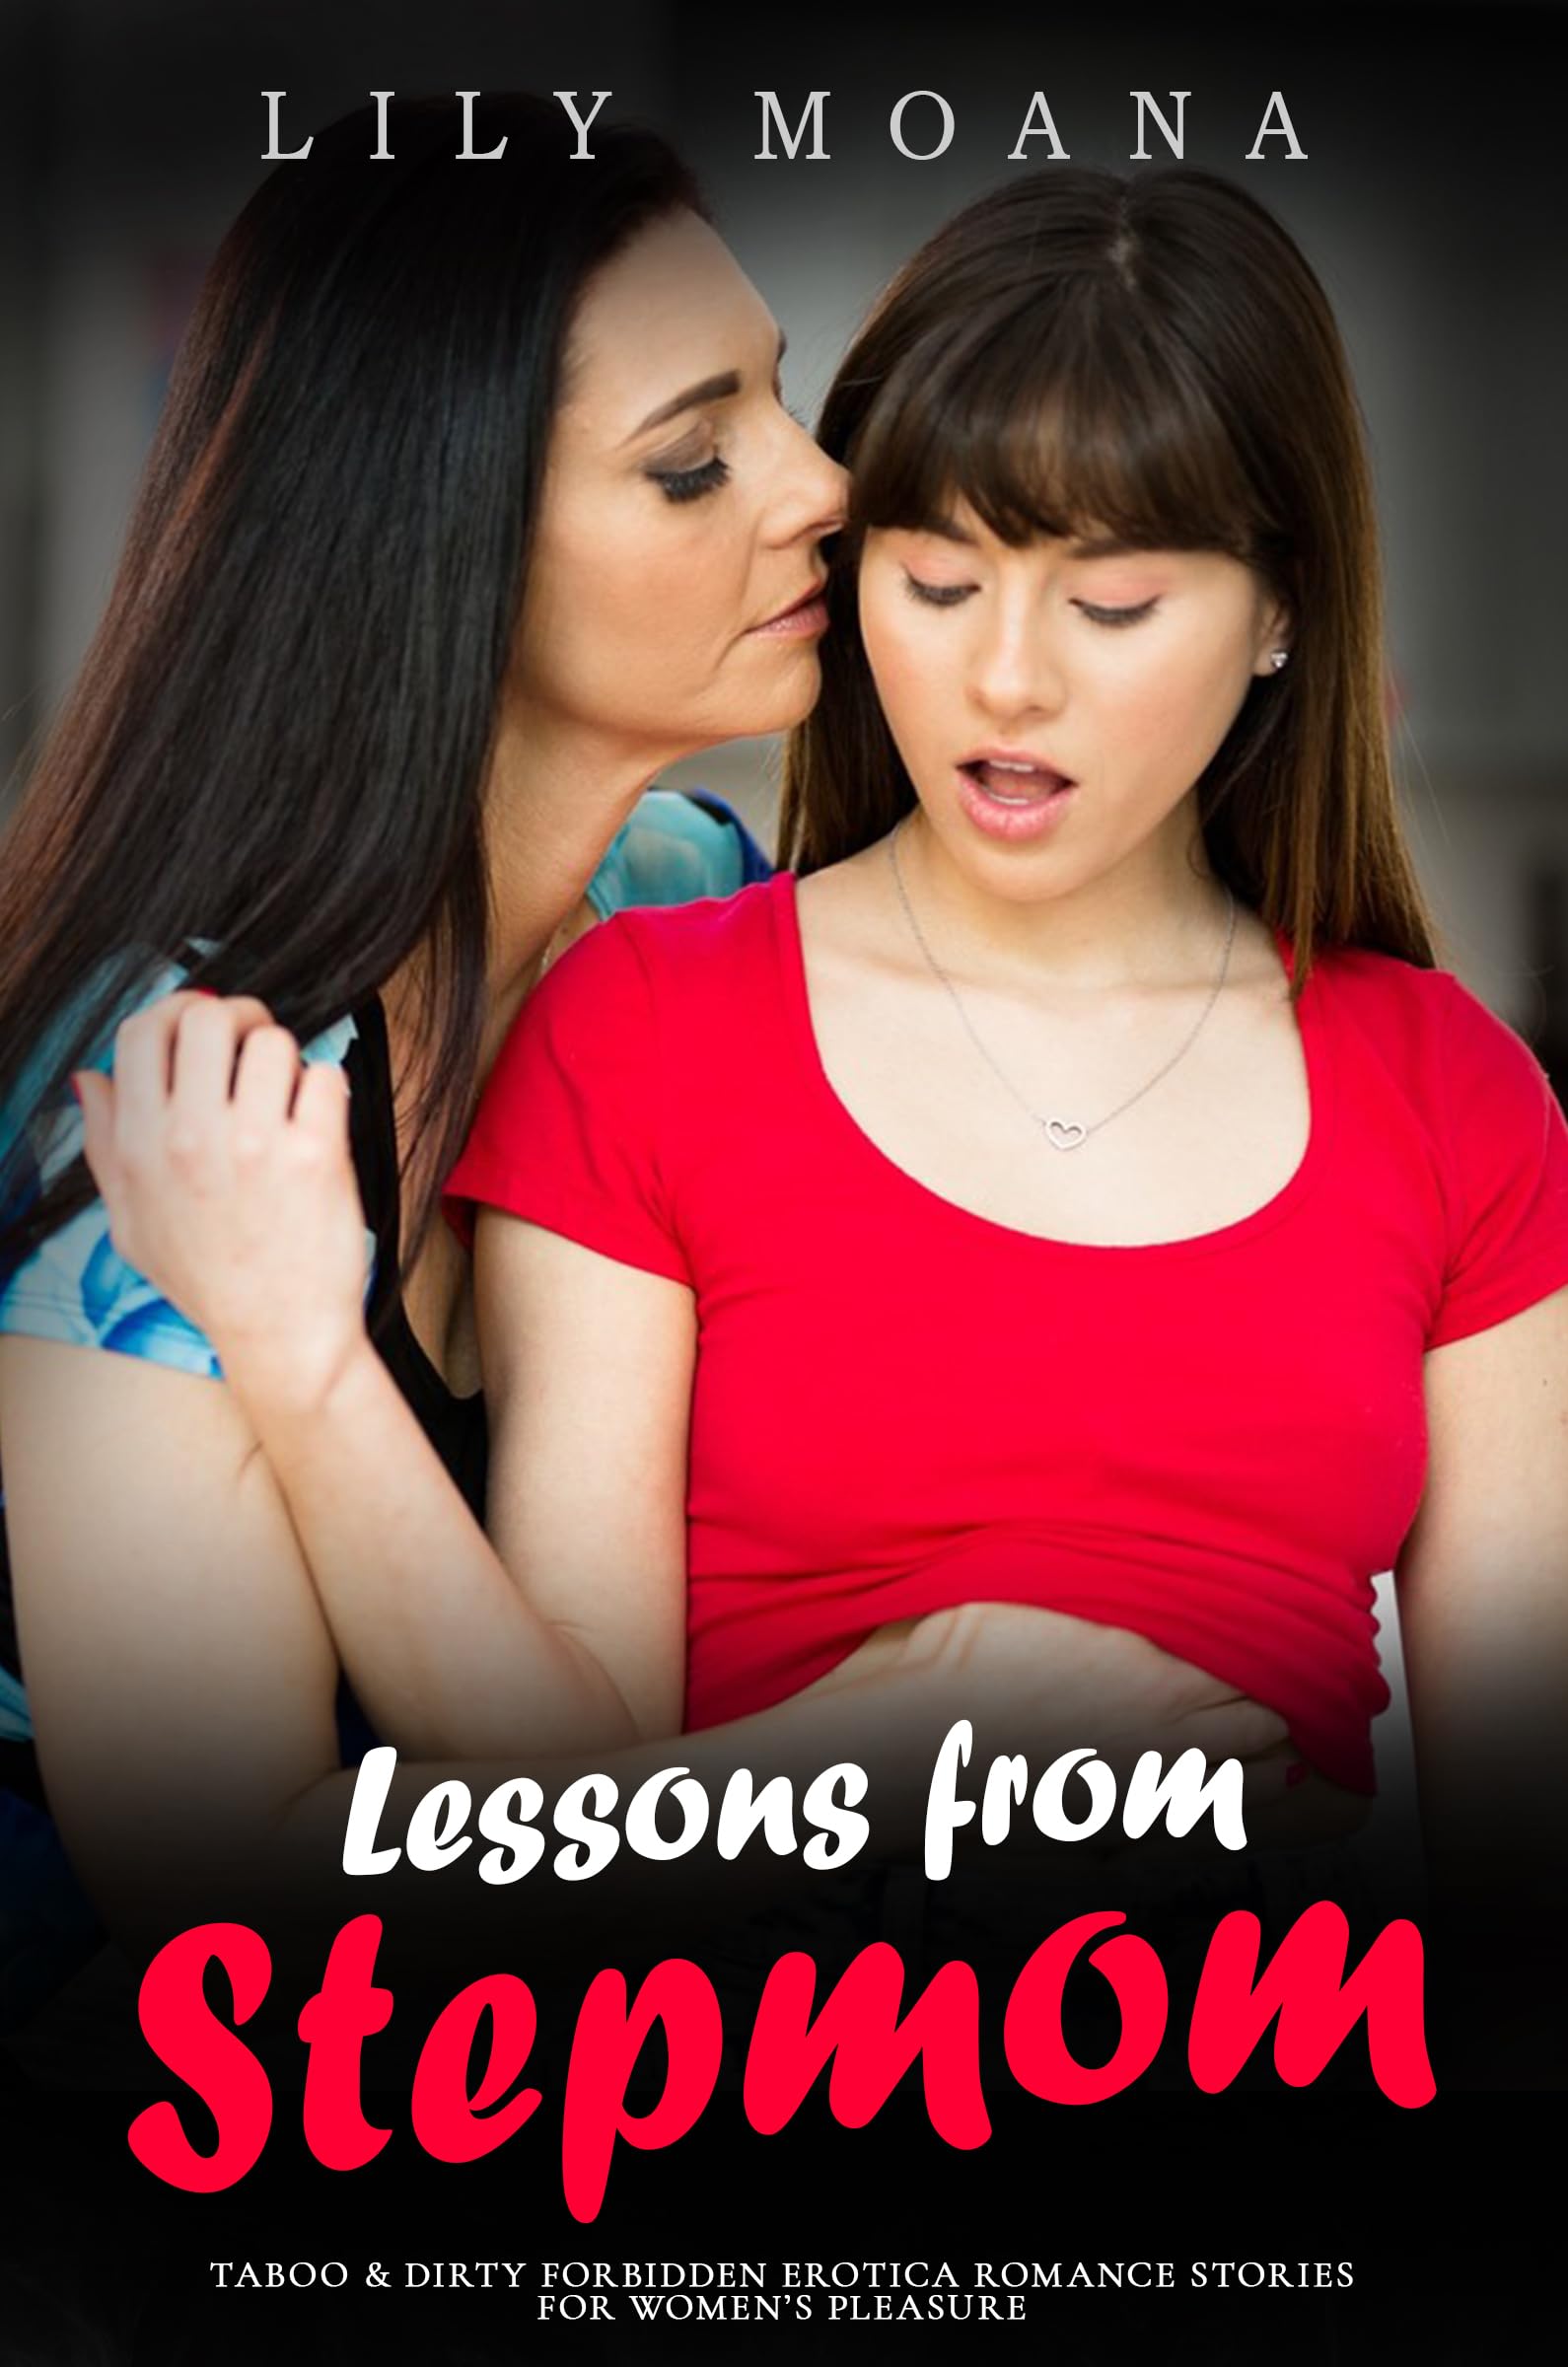 annalisa taylor recommends Lesbian Family Affair